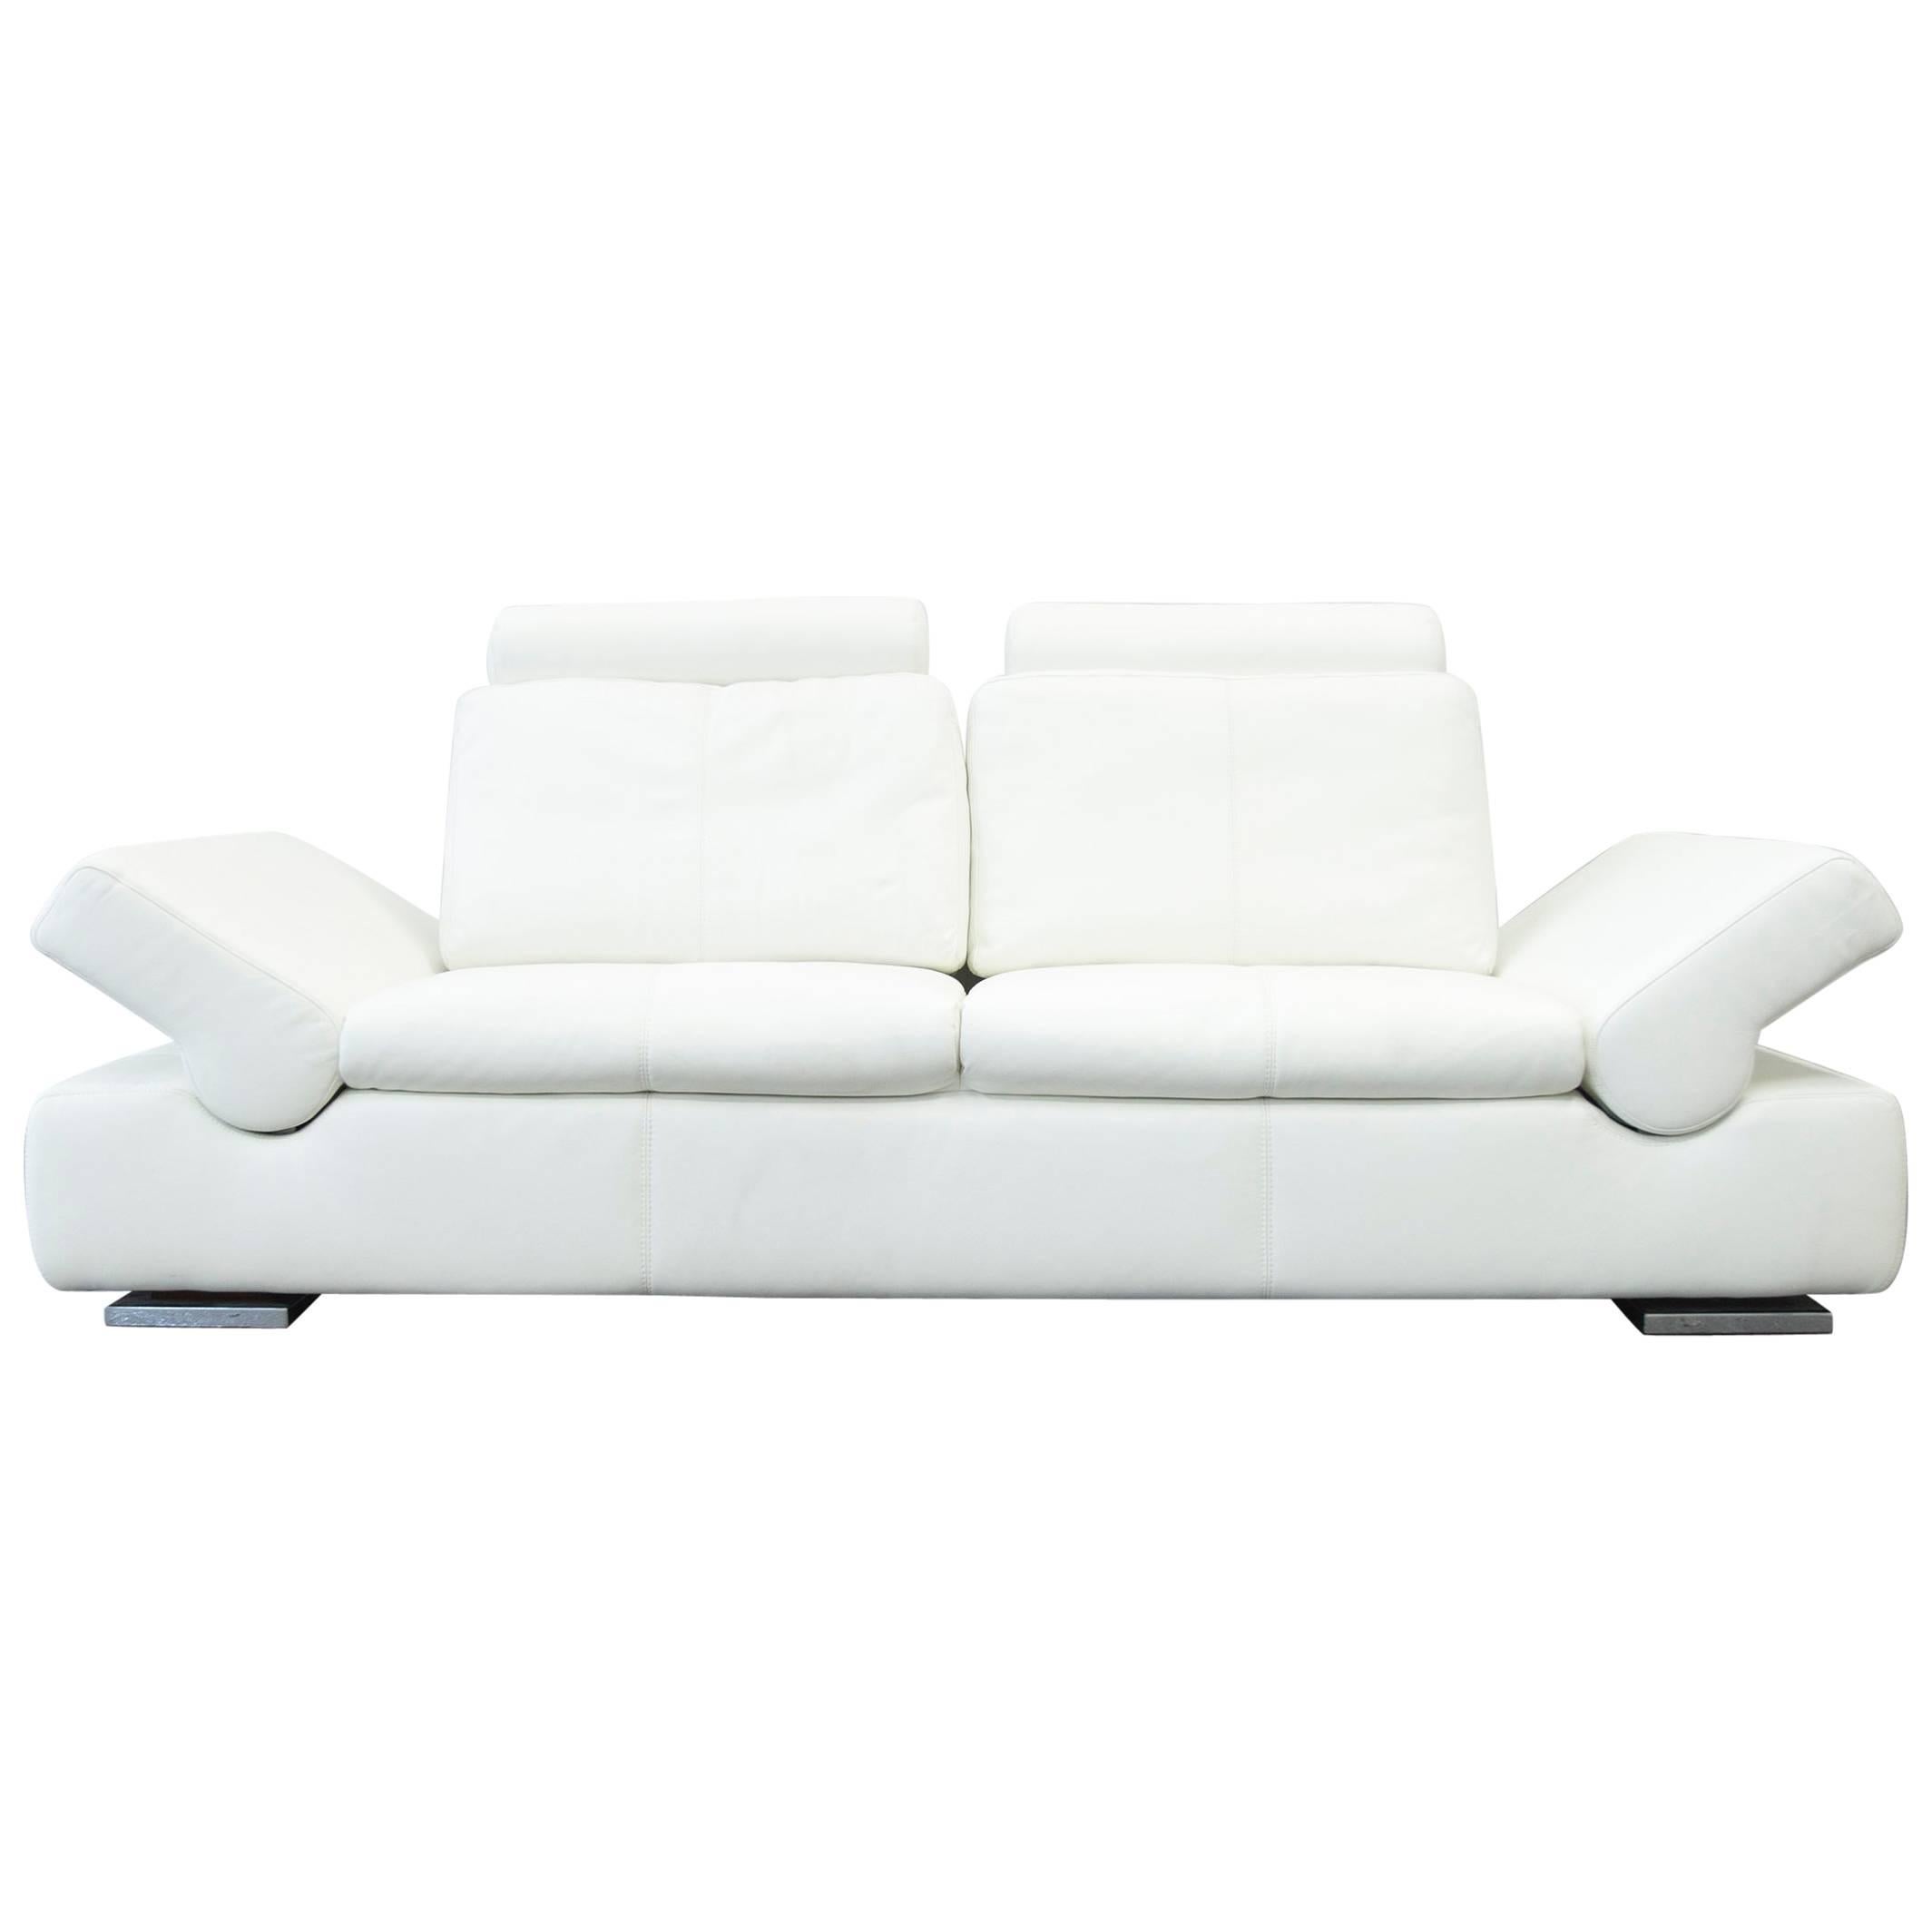 Musterring Linea Designer Leather Sofa White Three-seat Function Couch Modern For Sale